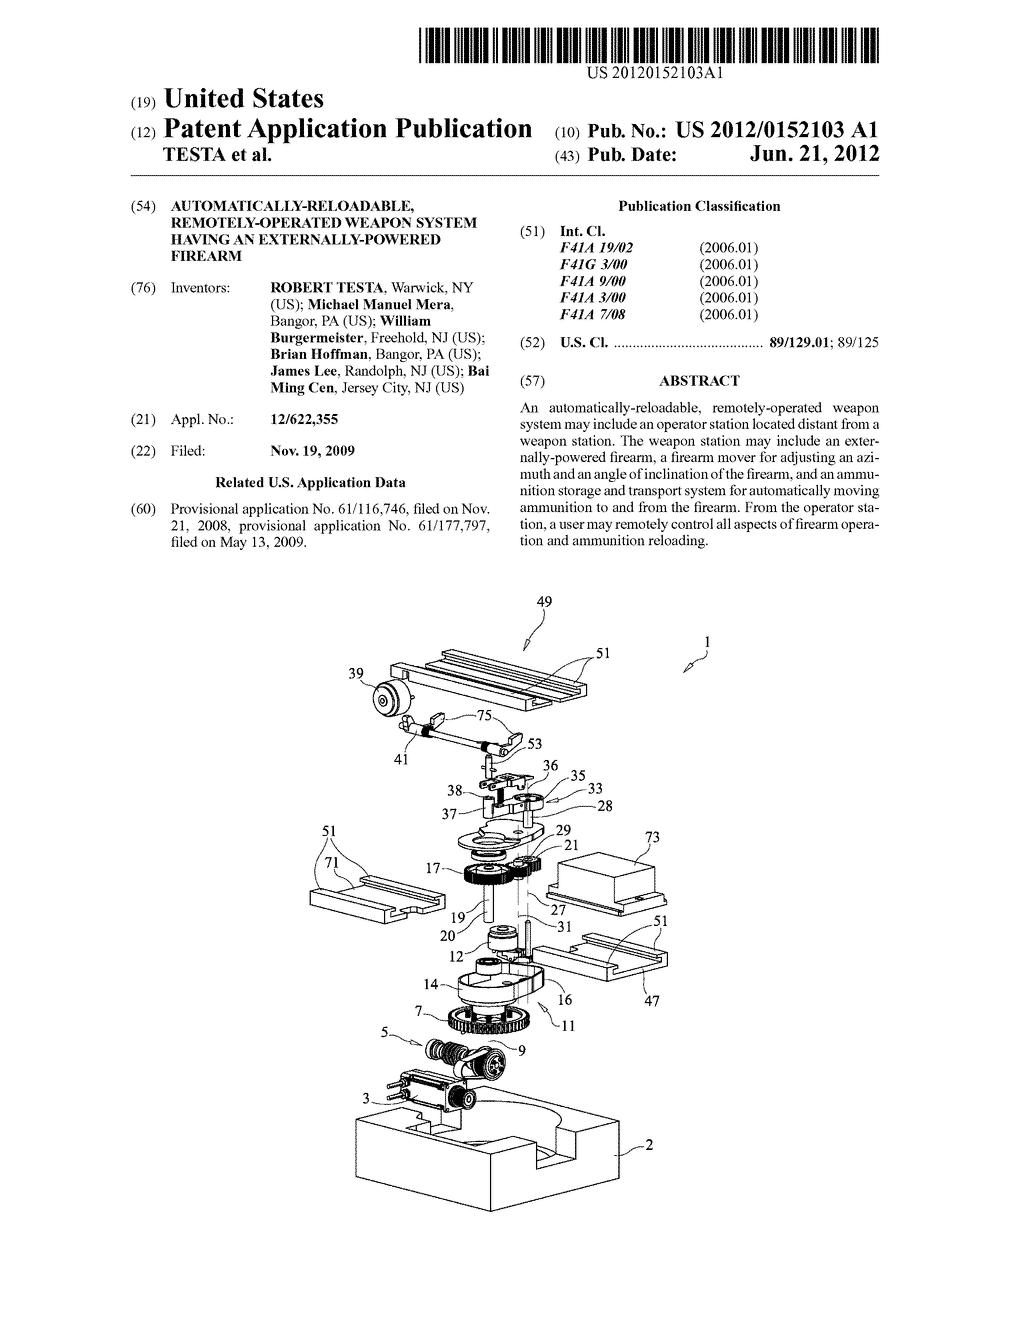 AUTOMATICALLY-RELOADABLE, REMOTELY-OPERATED WEAPON SYSTEM HAVING AN     EXTERNALLY-POWERED FIREARM - diagram, schematic, and image 01